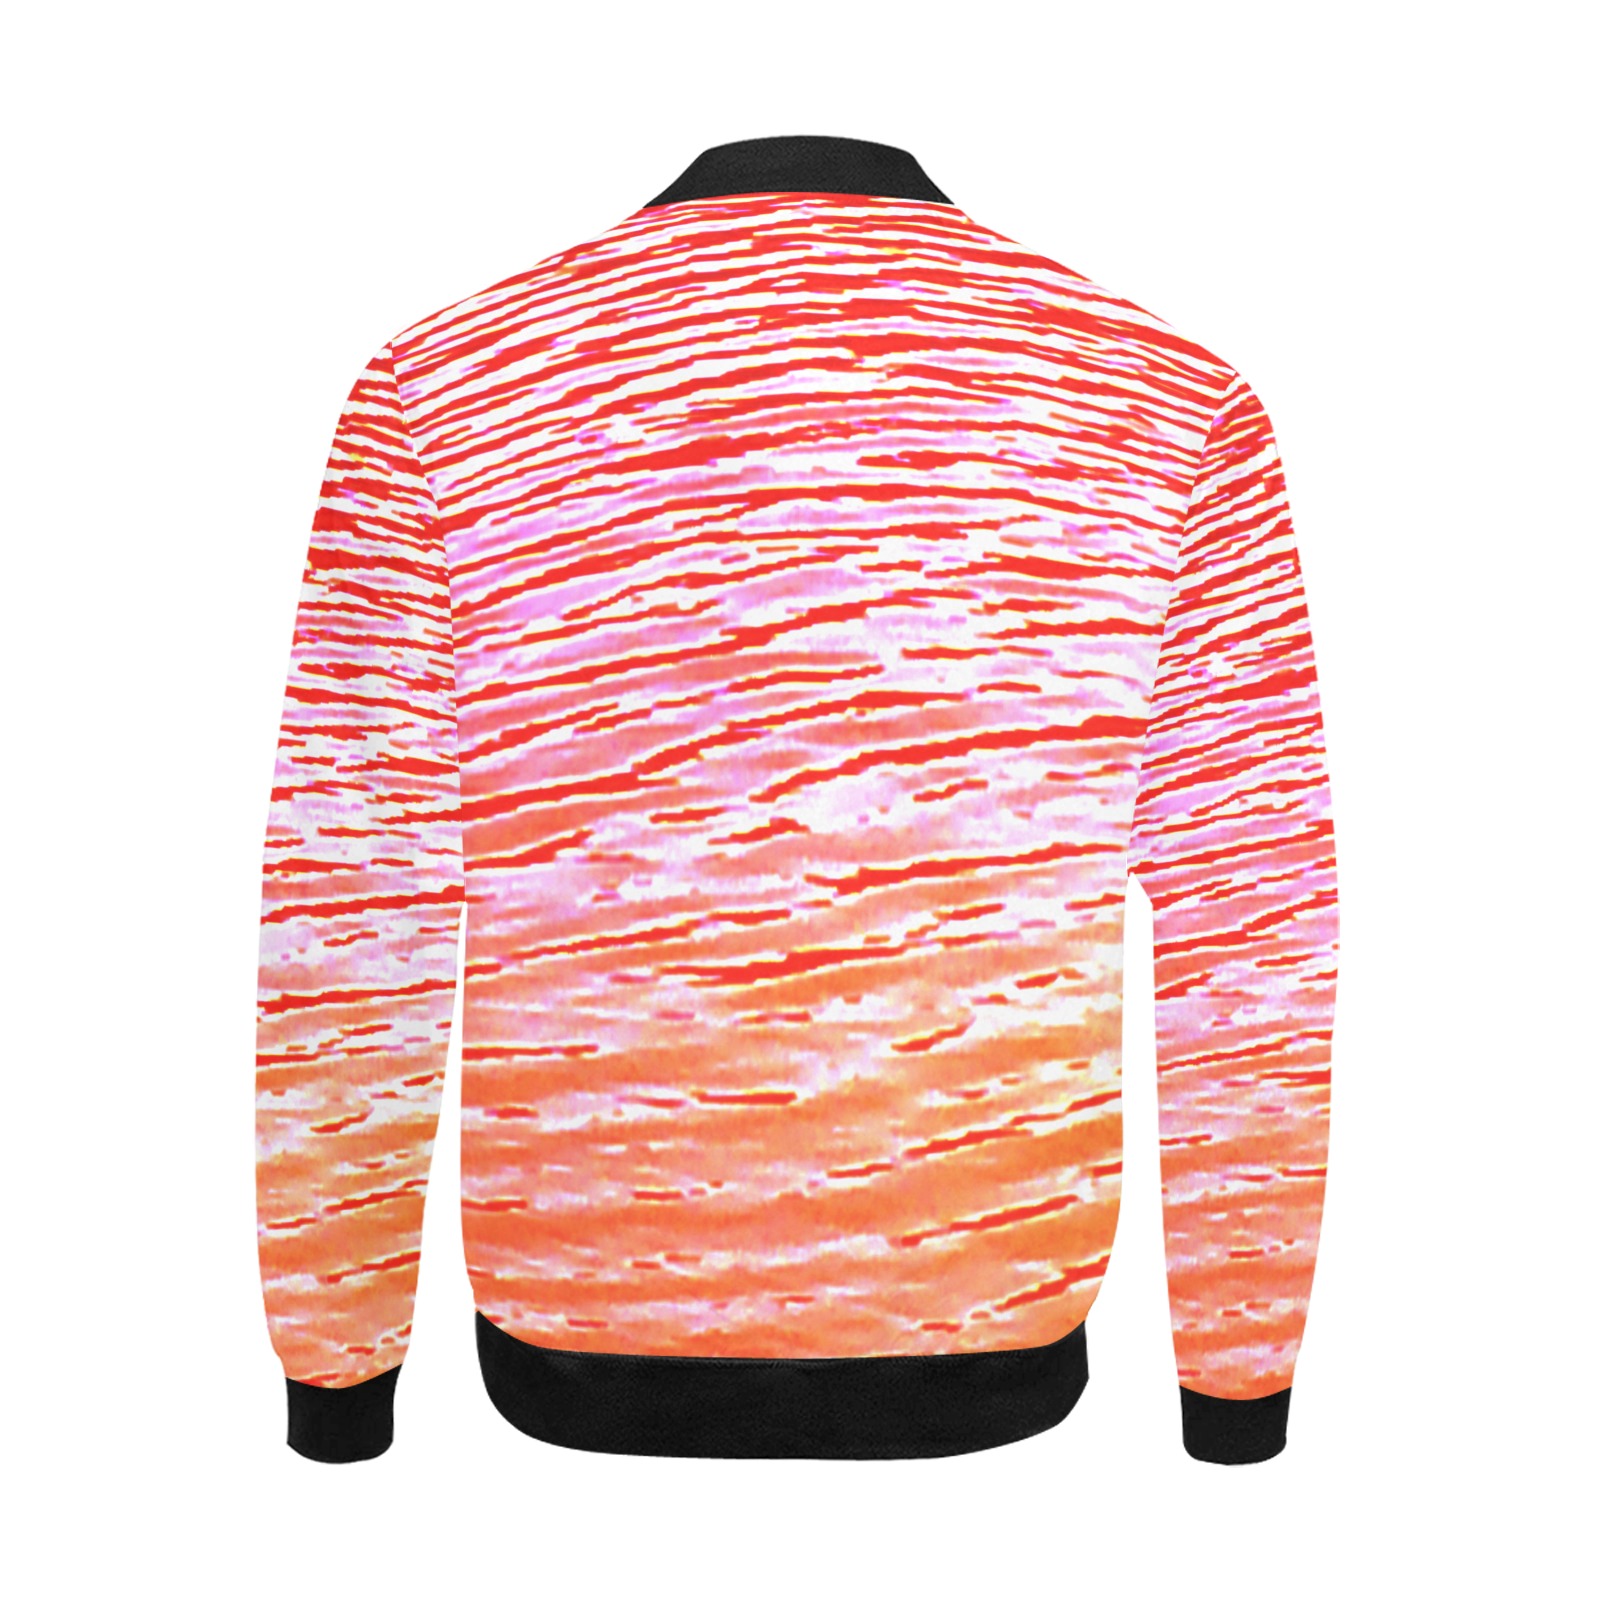 Orange and red water All Over Print Bomber Jacket for Men (Model H31)